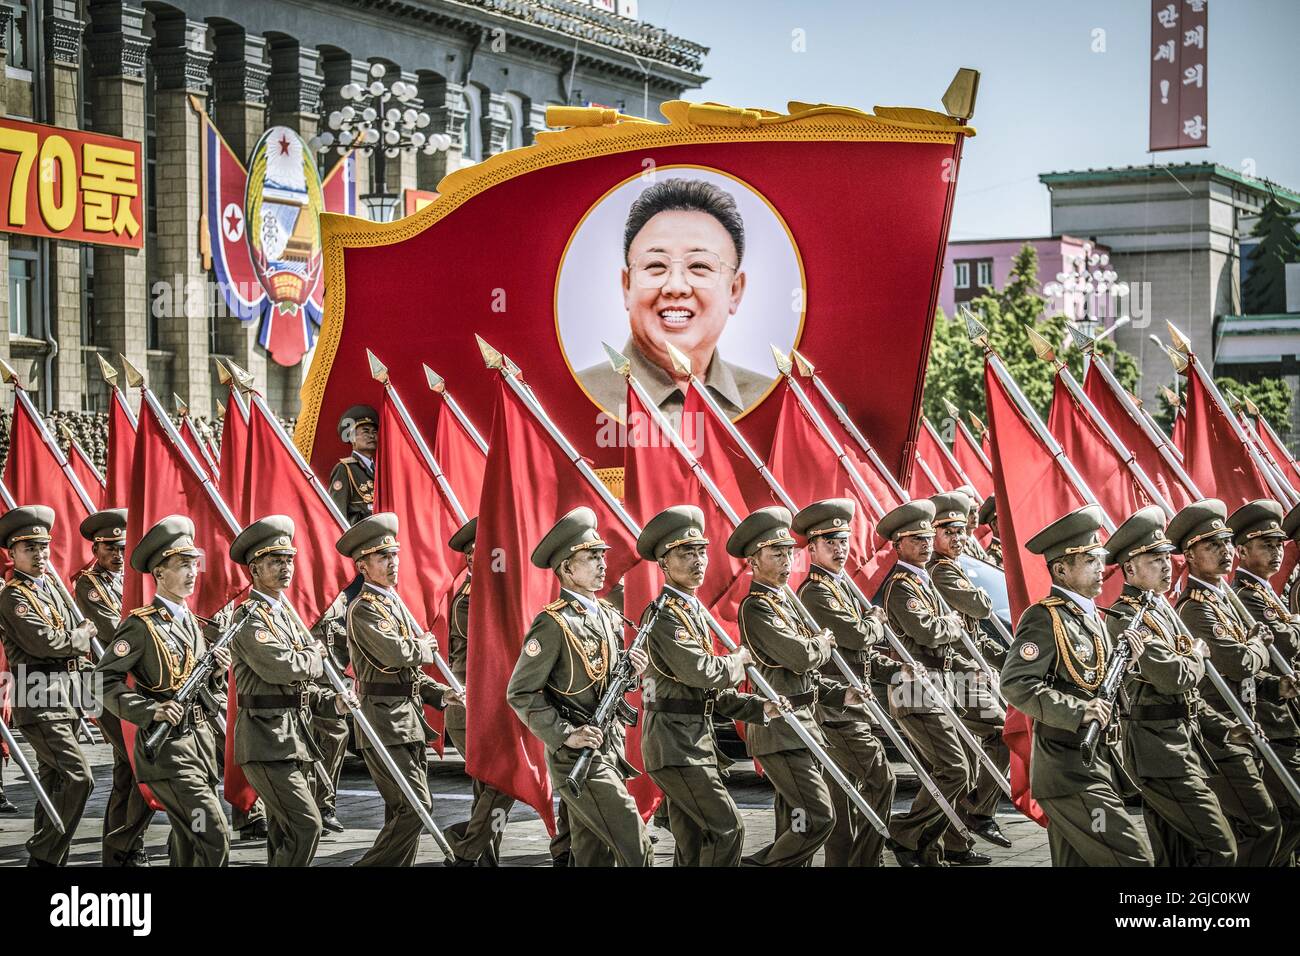 Military parade during North Korea's 70 year anniversary in Pyong Yang Foto: Yvonne Asell / SvD / TT / Kod: 30202 Stock Photo